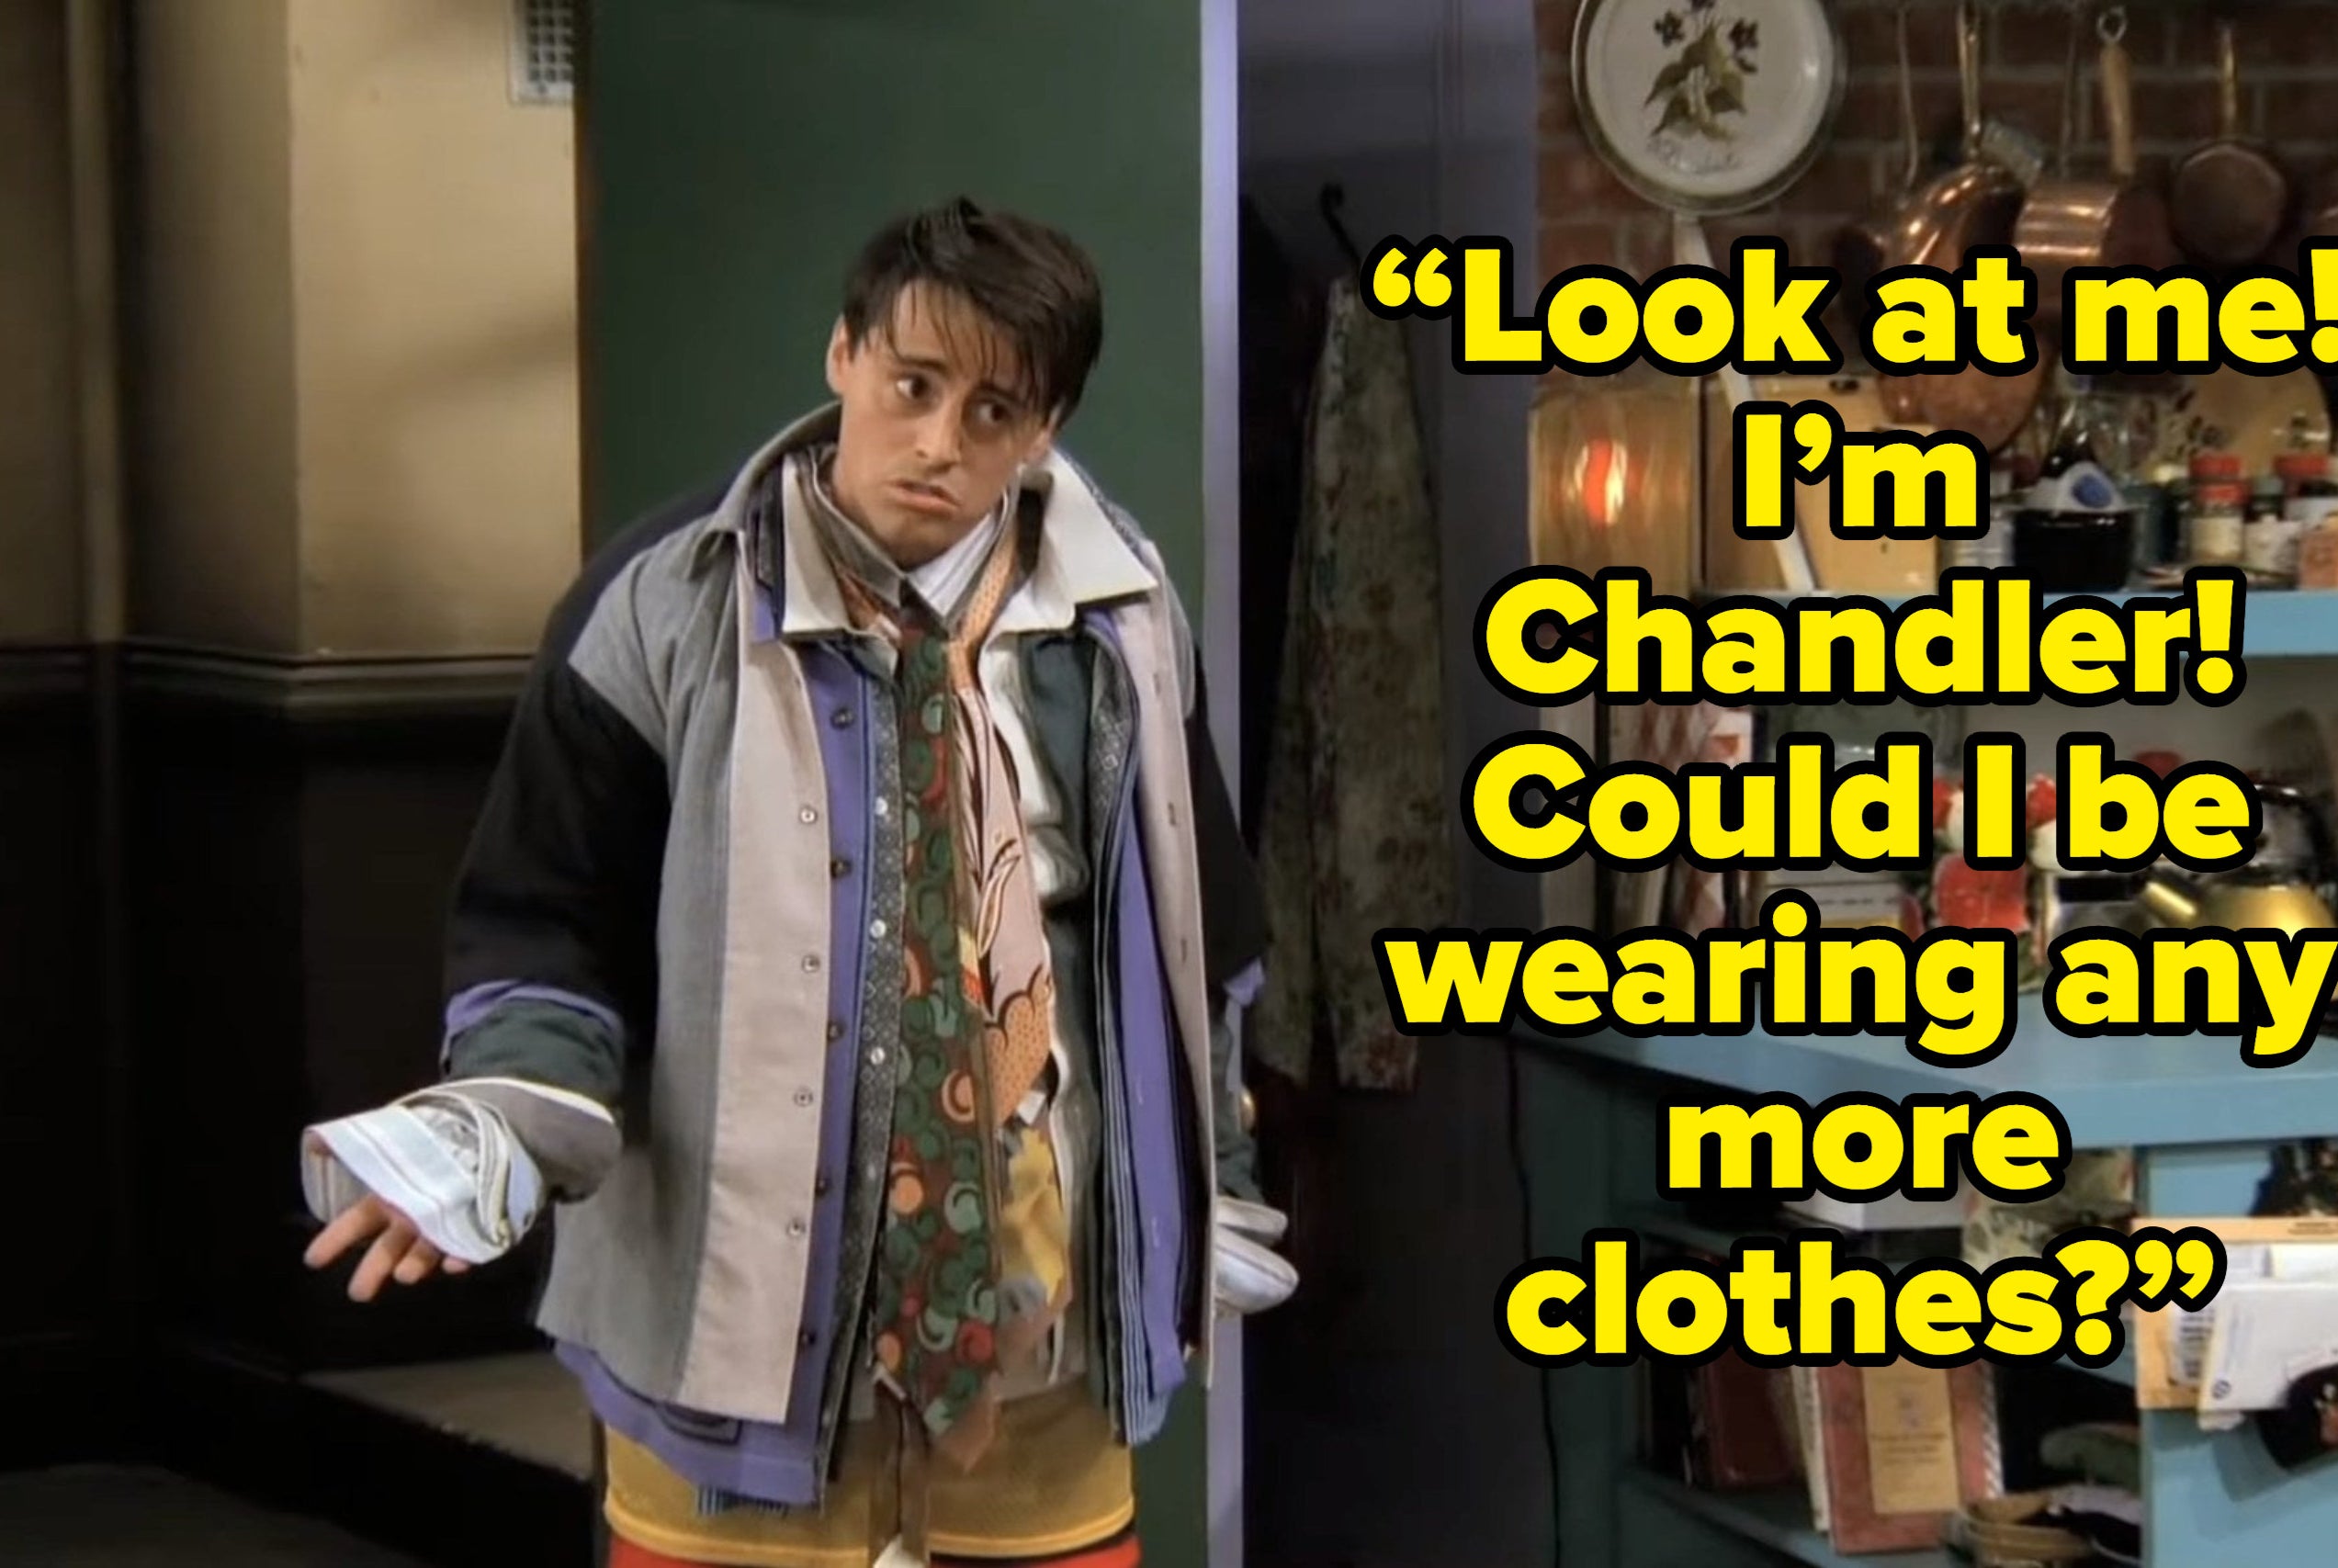 joey saying “Look at me! I’m Chandler! Could I be wearing any more clothes?” on friends